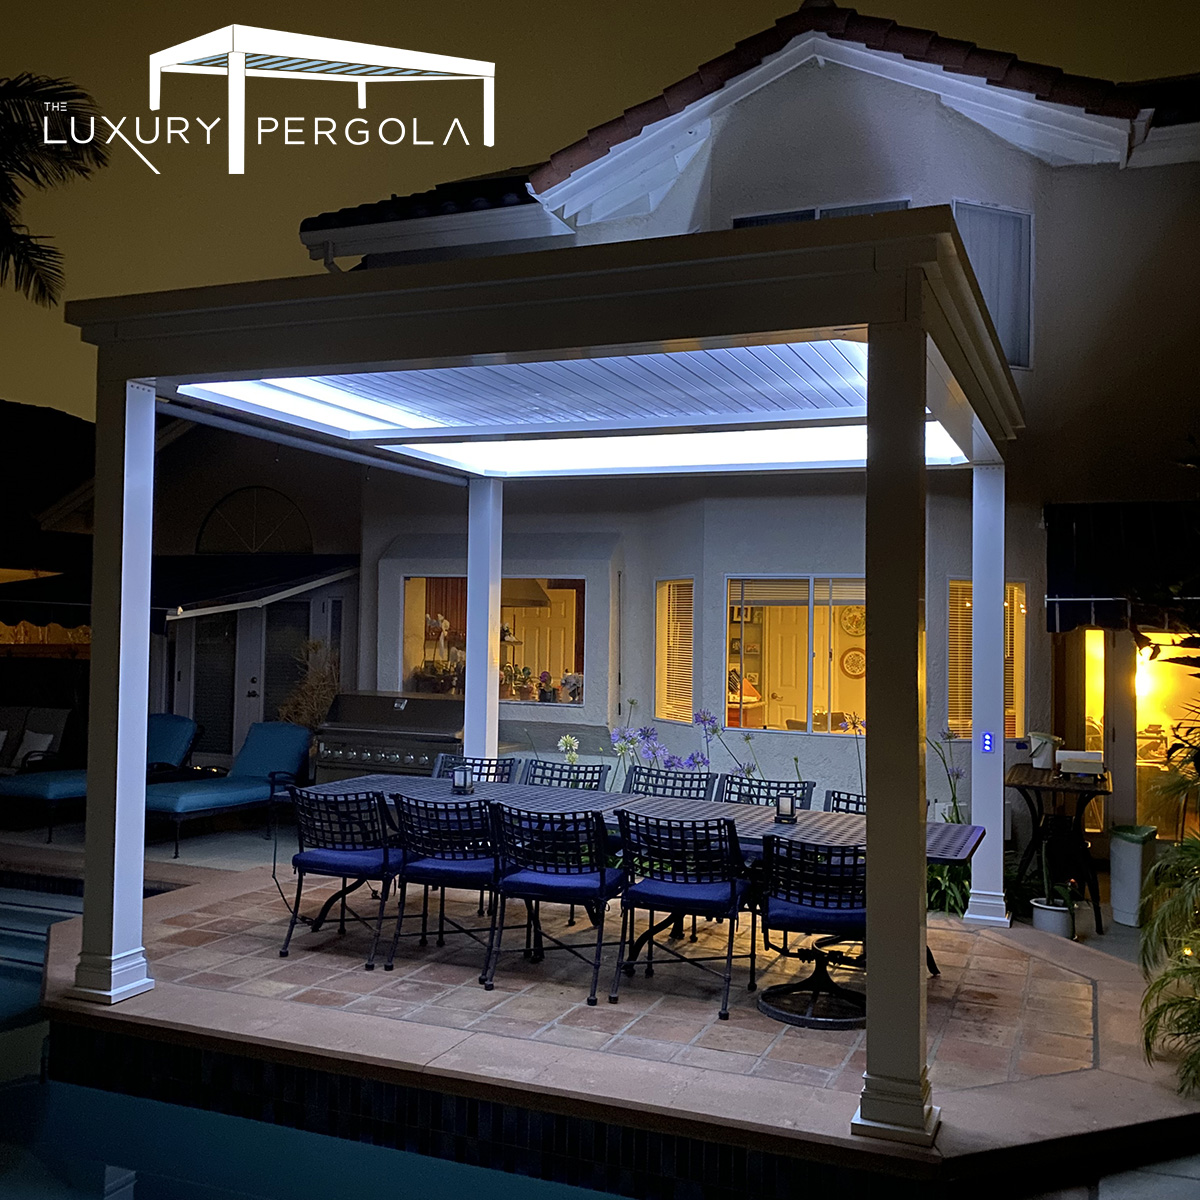 Selecting the Right Material for Your Pergola